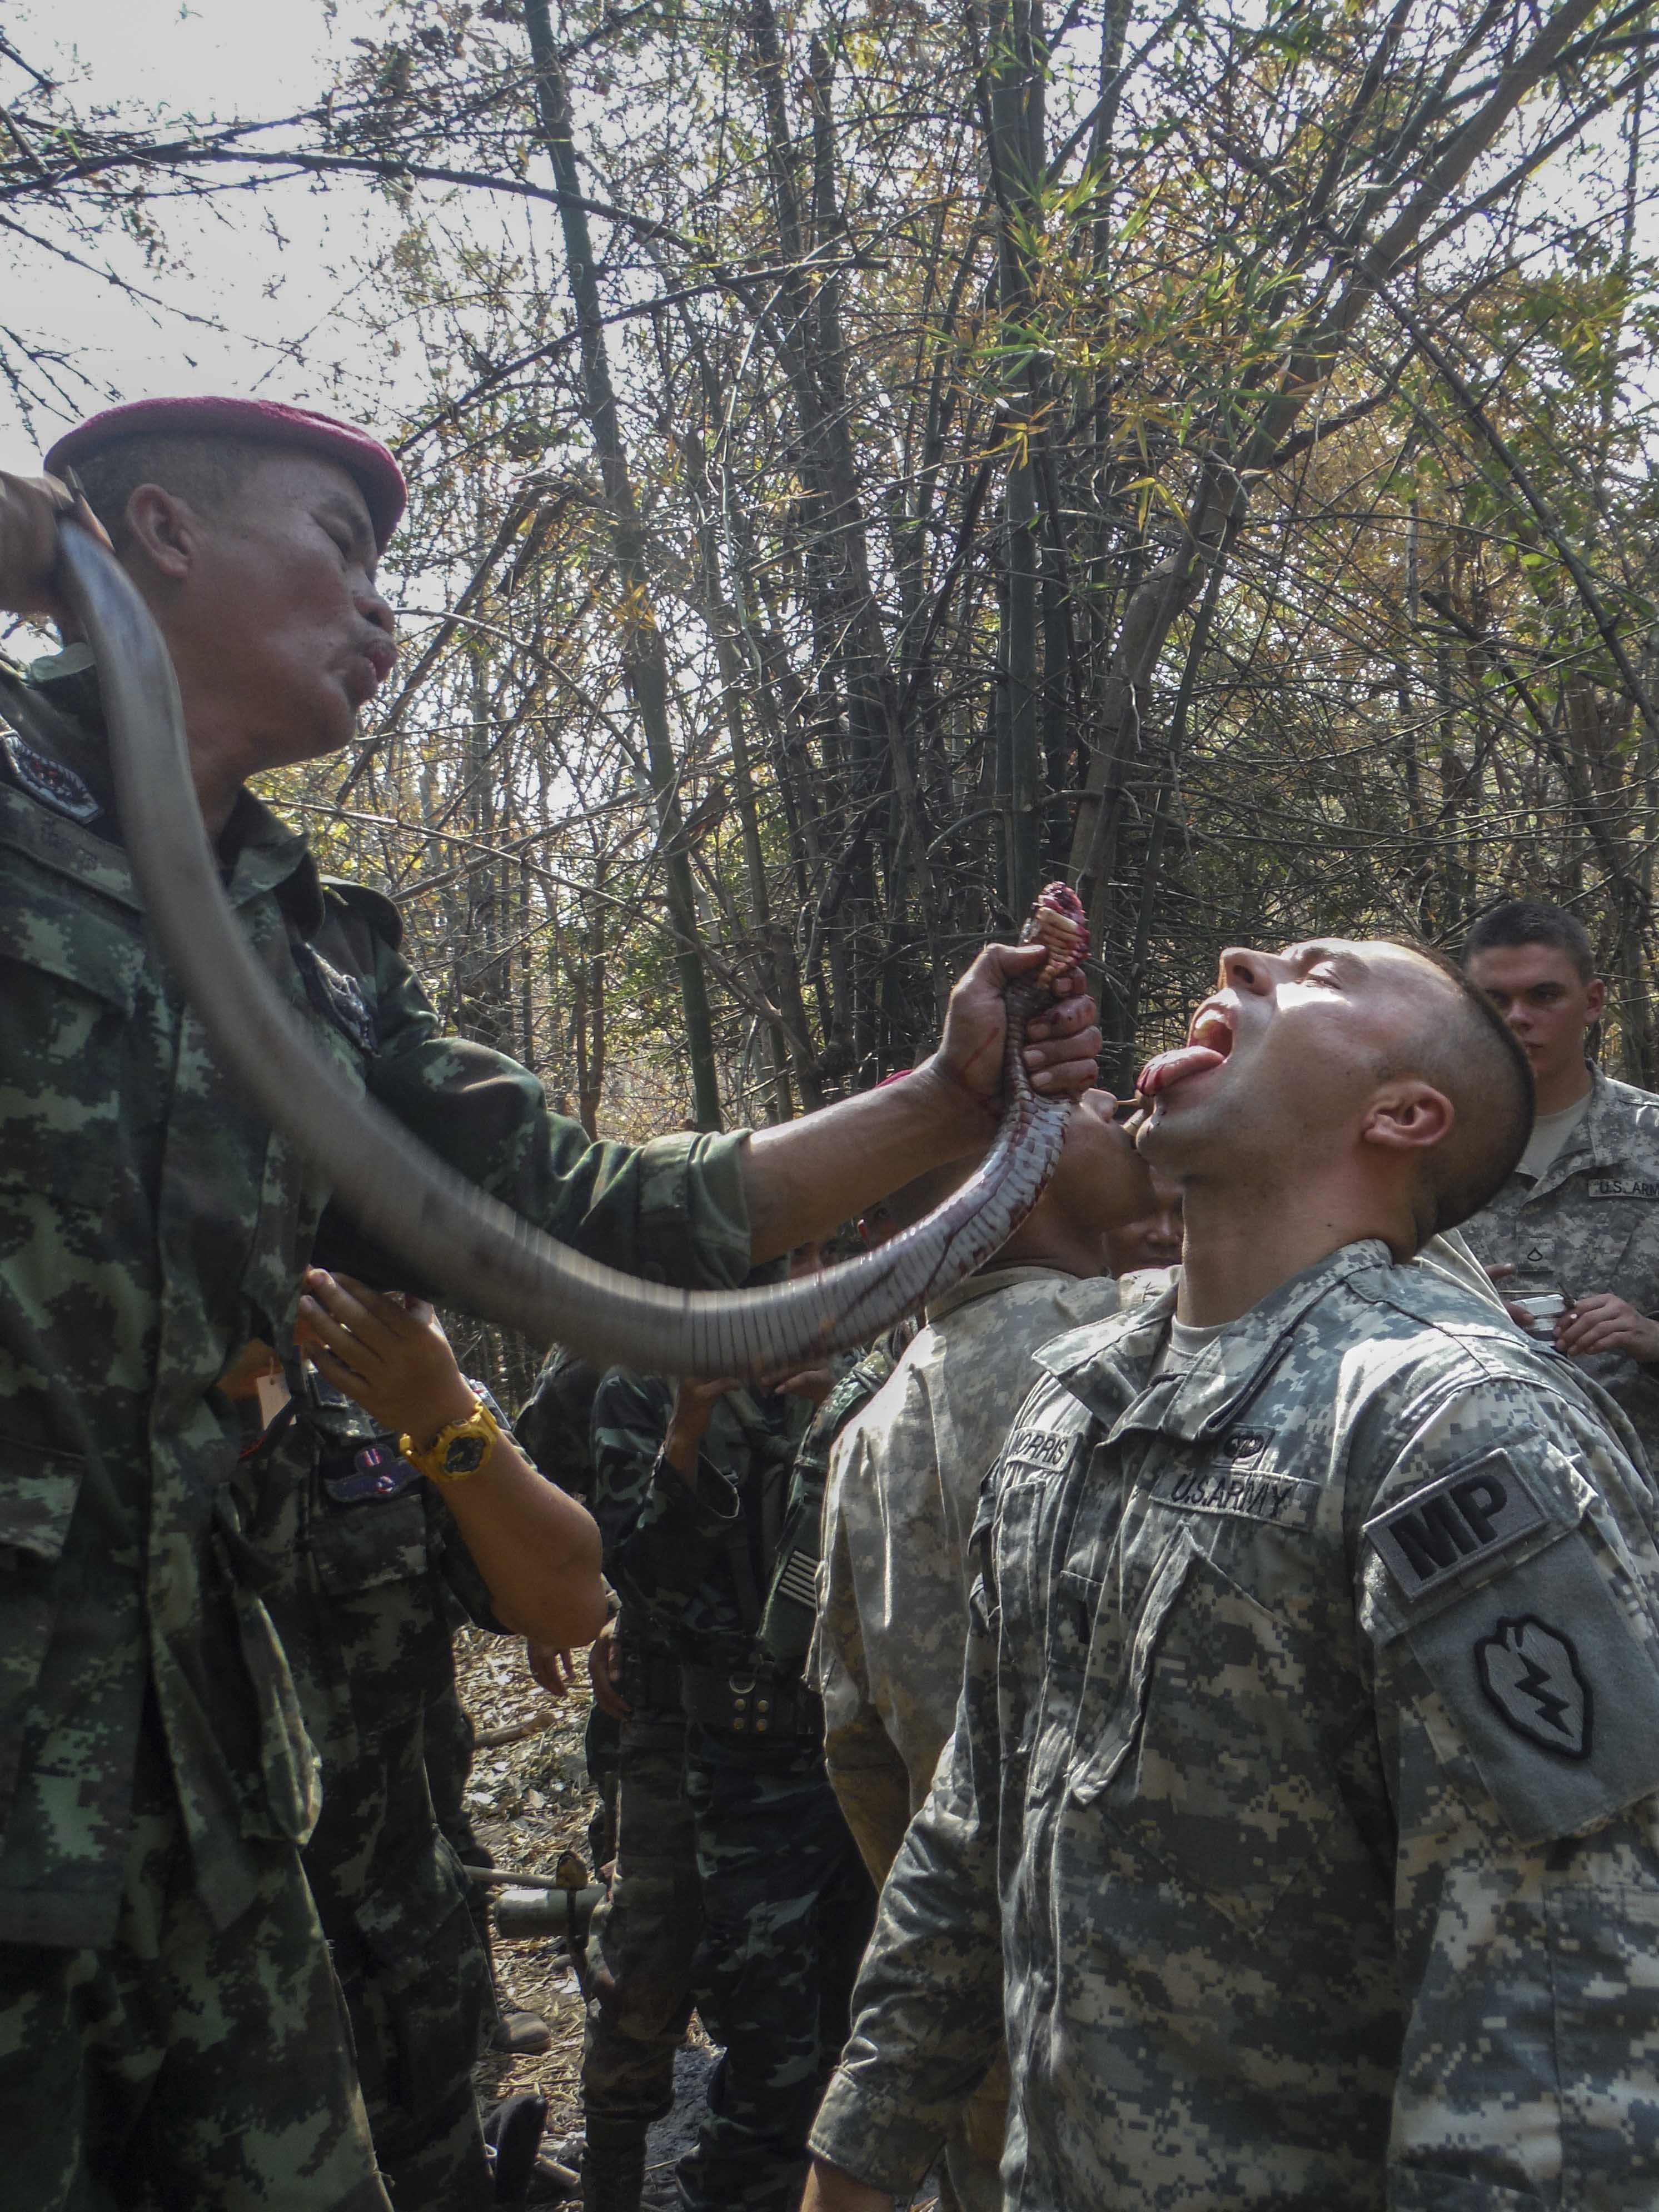 US soldiers learn to survive in Thailand [Image 2 of 3]